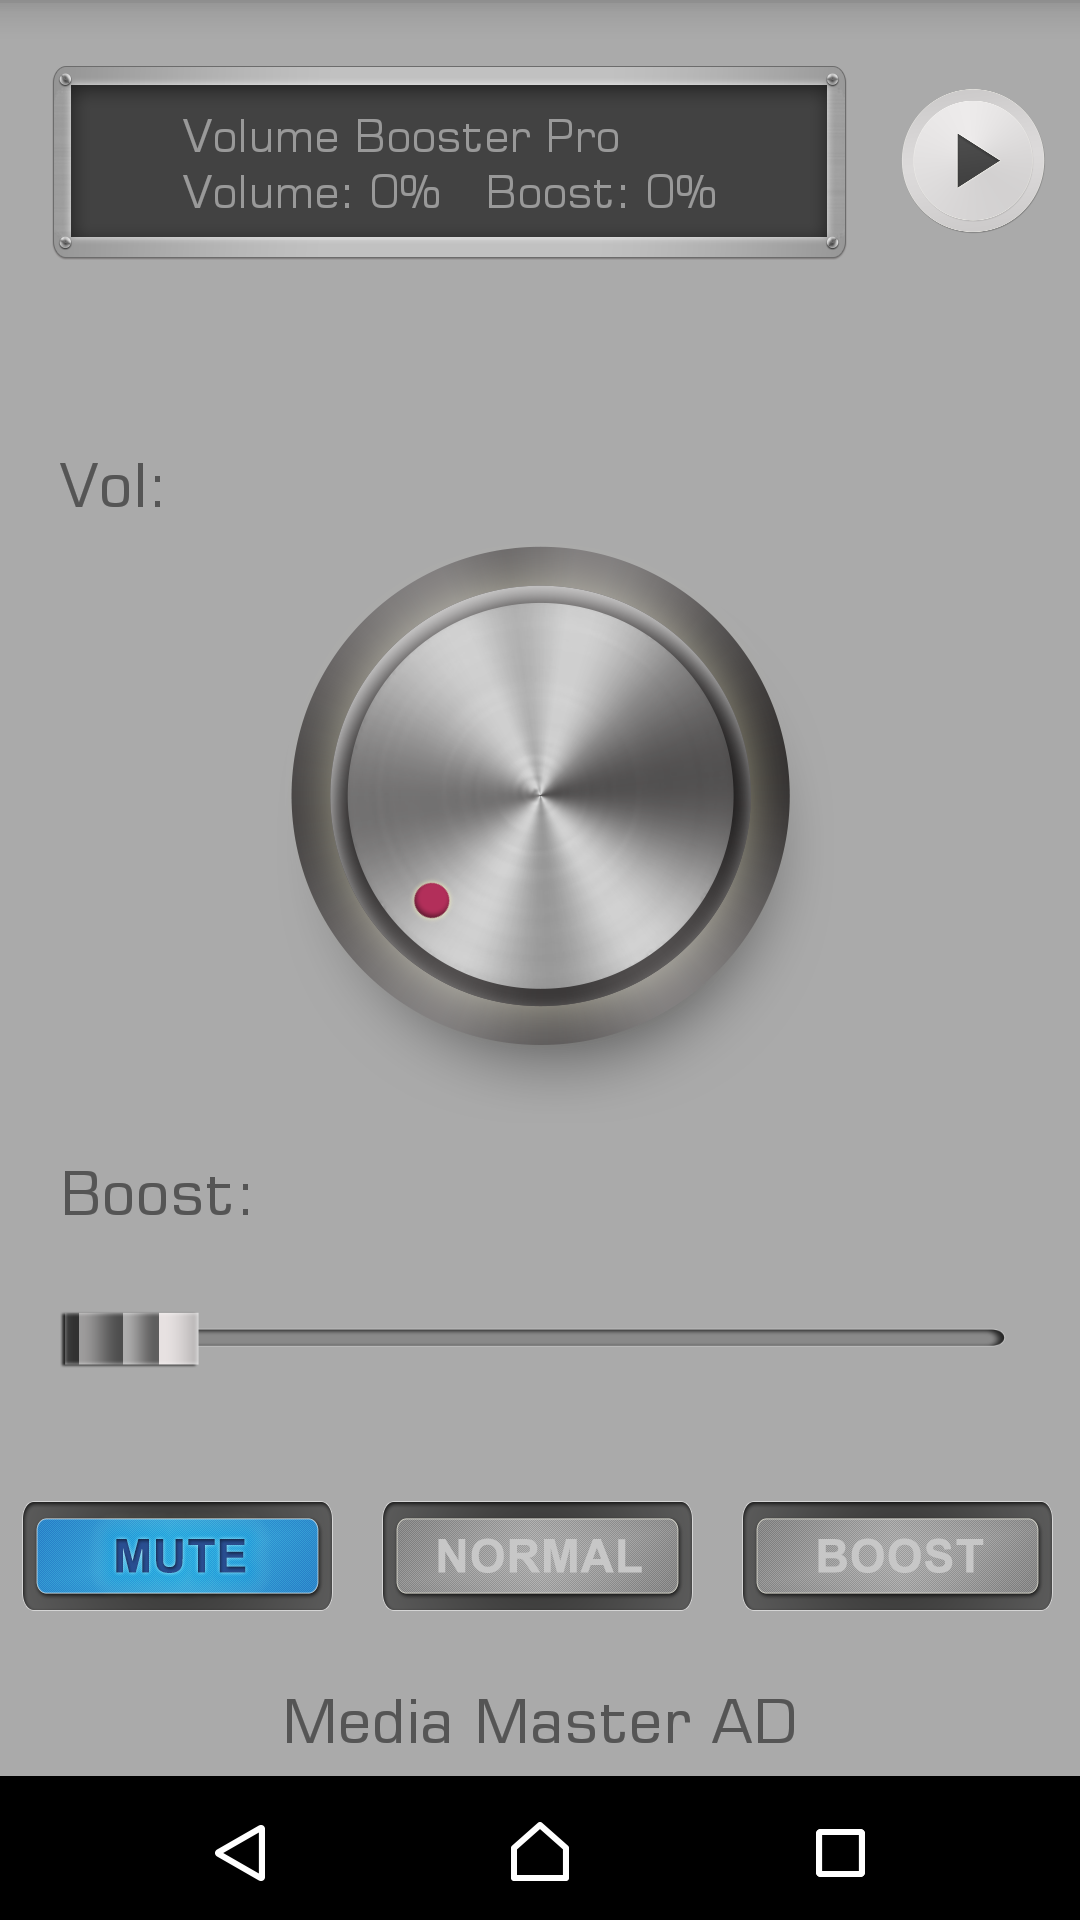 Volume Booster Pro APK 2.0 for Android – Download Volume Booster Pro APK  Latest Version from APKFab.com